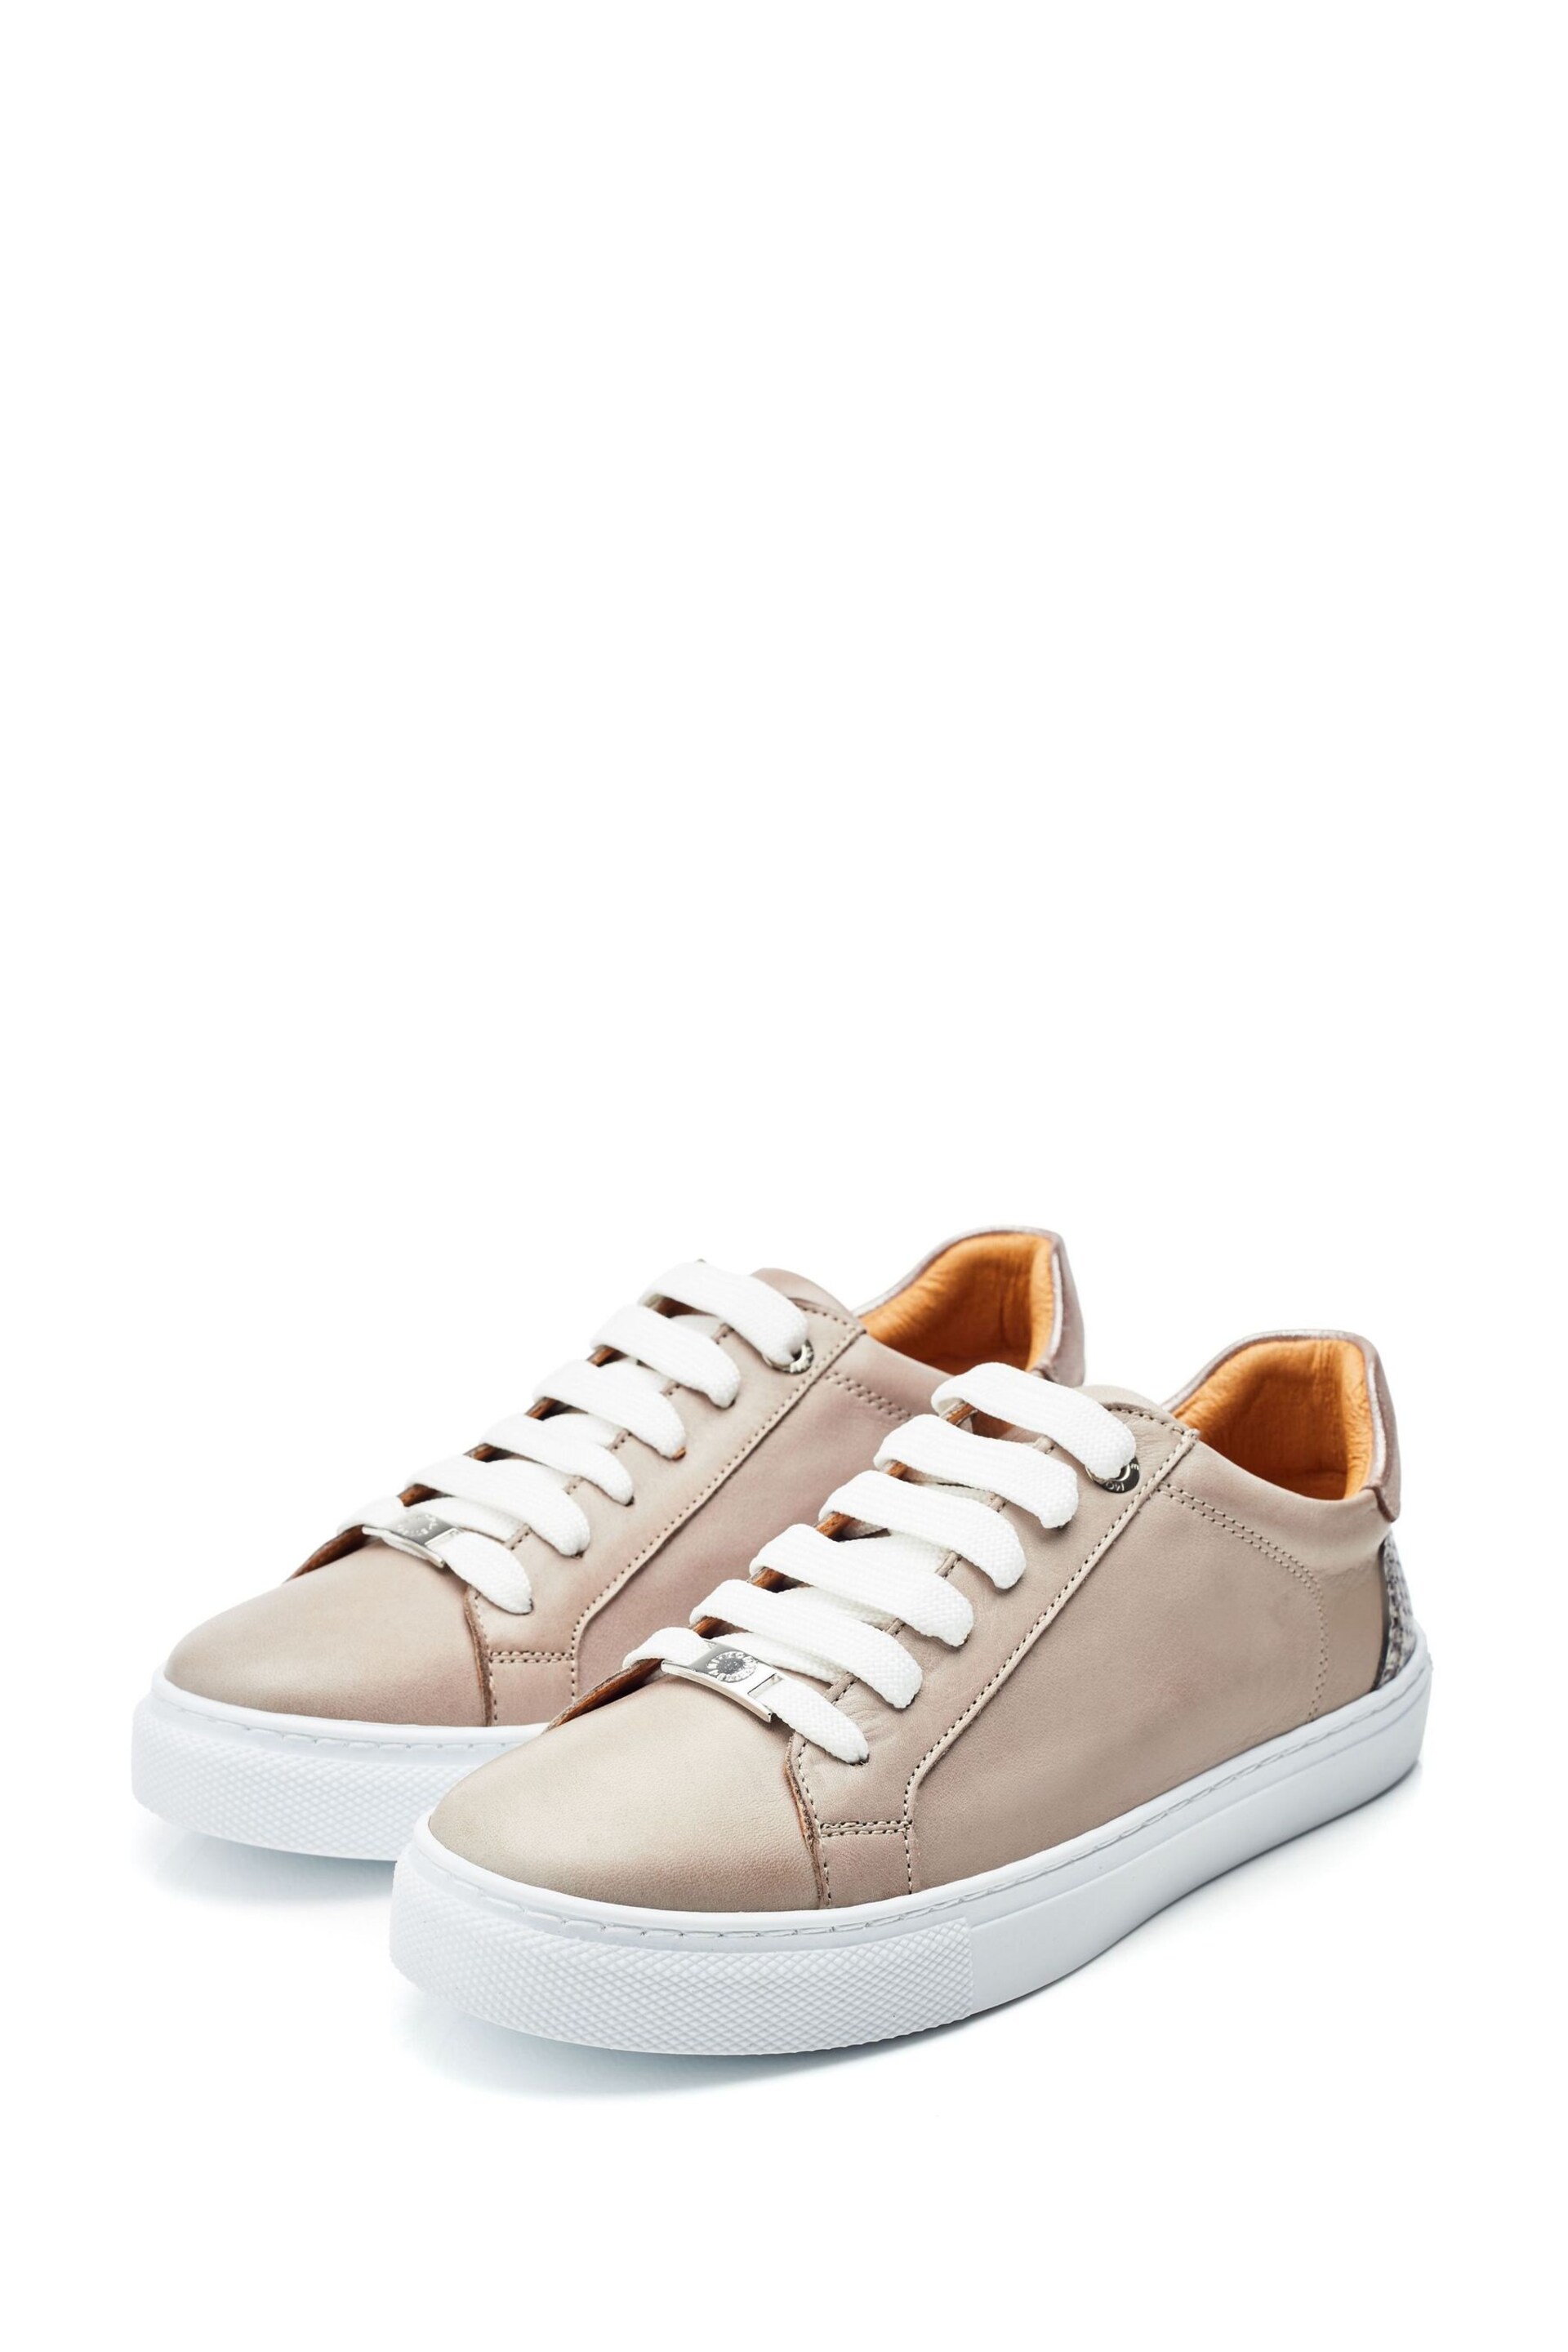 Moda in Pelle Slim Natural Braidie Sole Lace-Up Trainers - Image 2 of 4